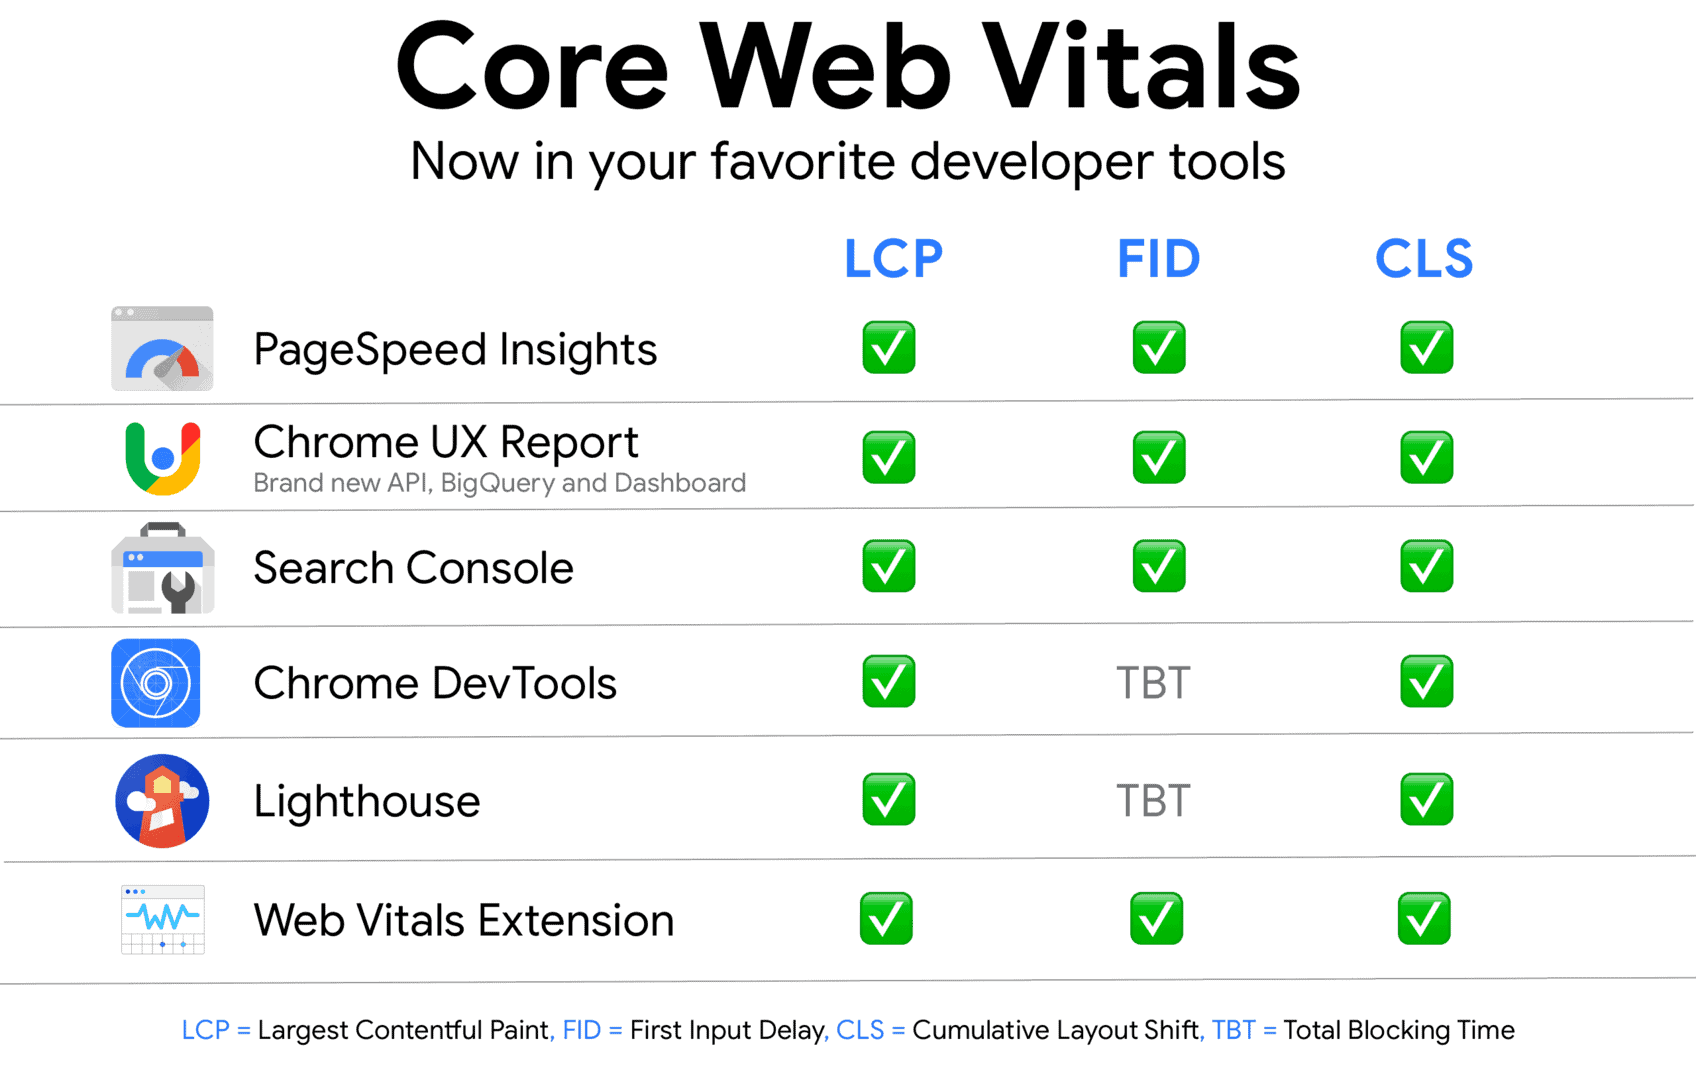 Tools to measure Core Web Vitals powered by Google